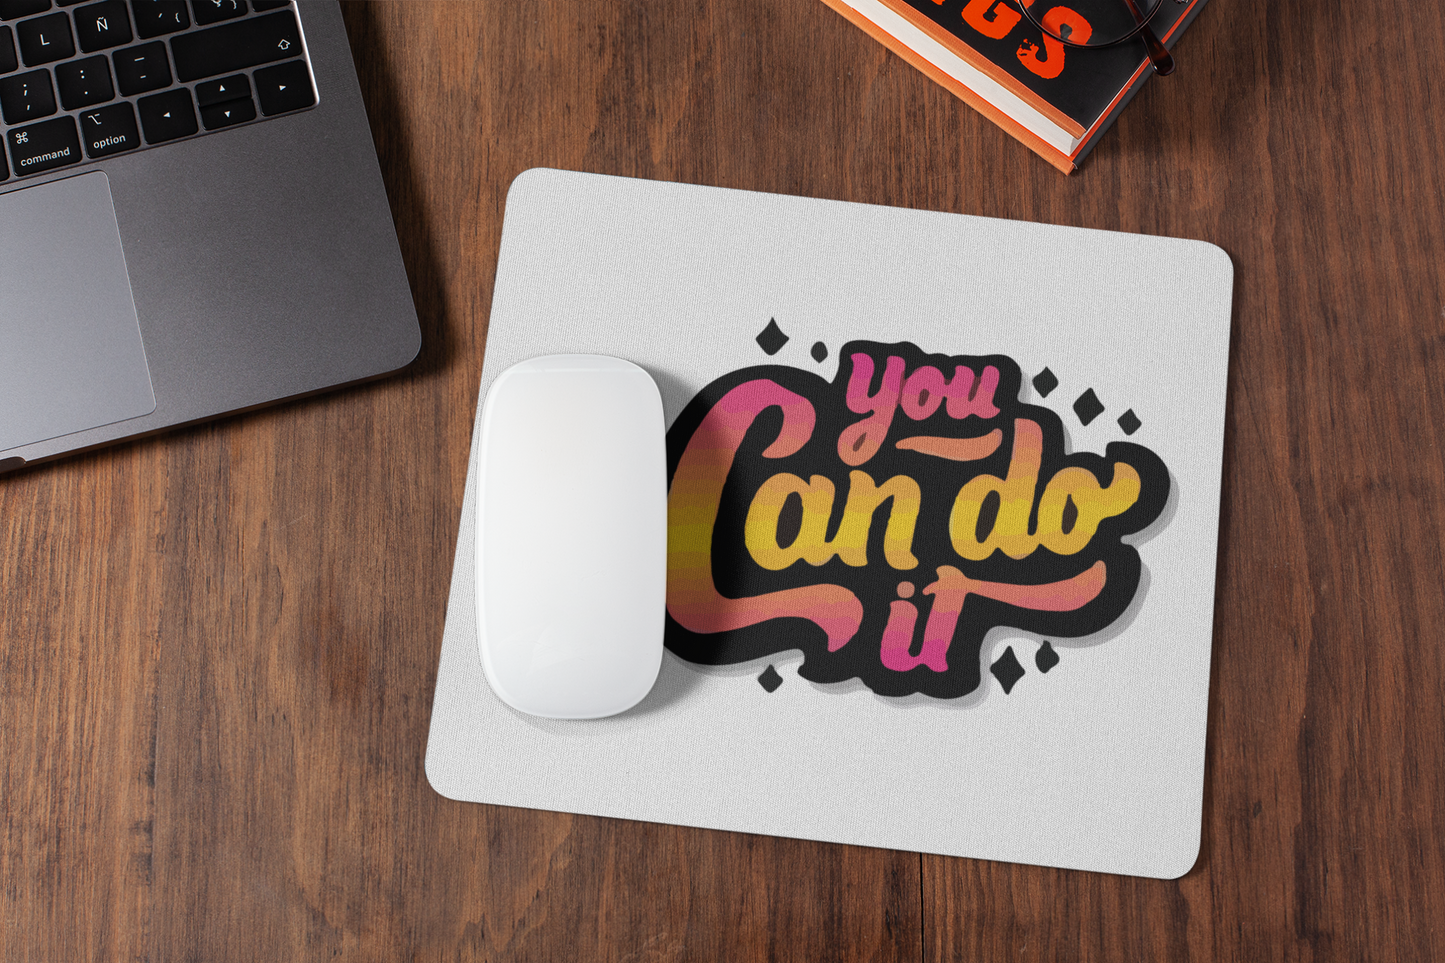 You can do it mousepad for laptop and desktop with Rubber Base - Anti Skid